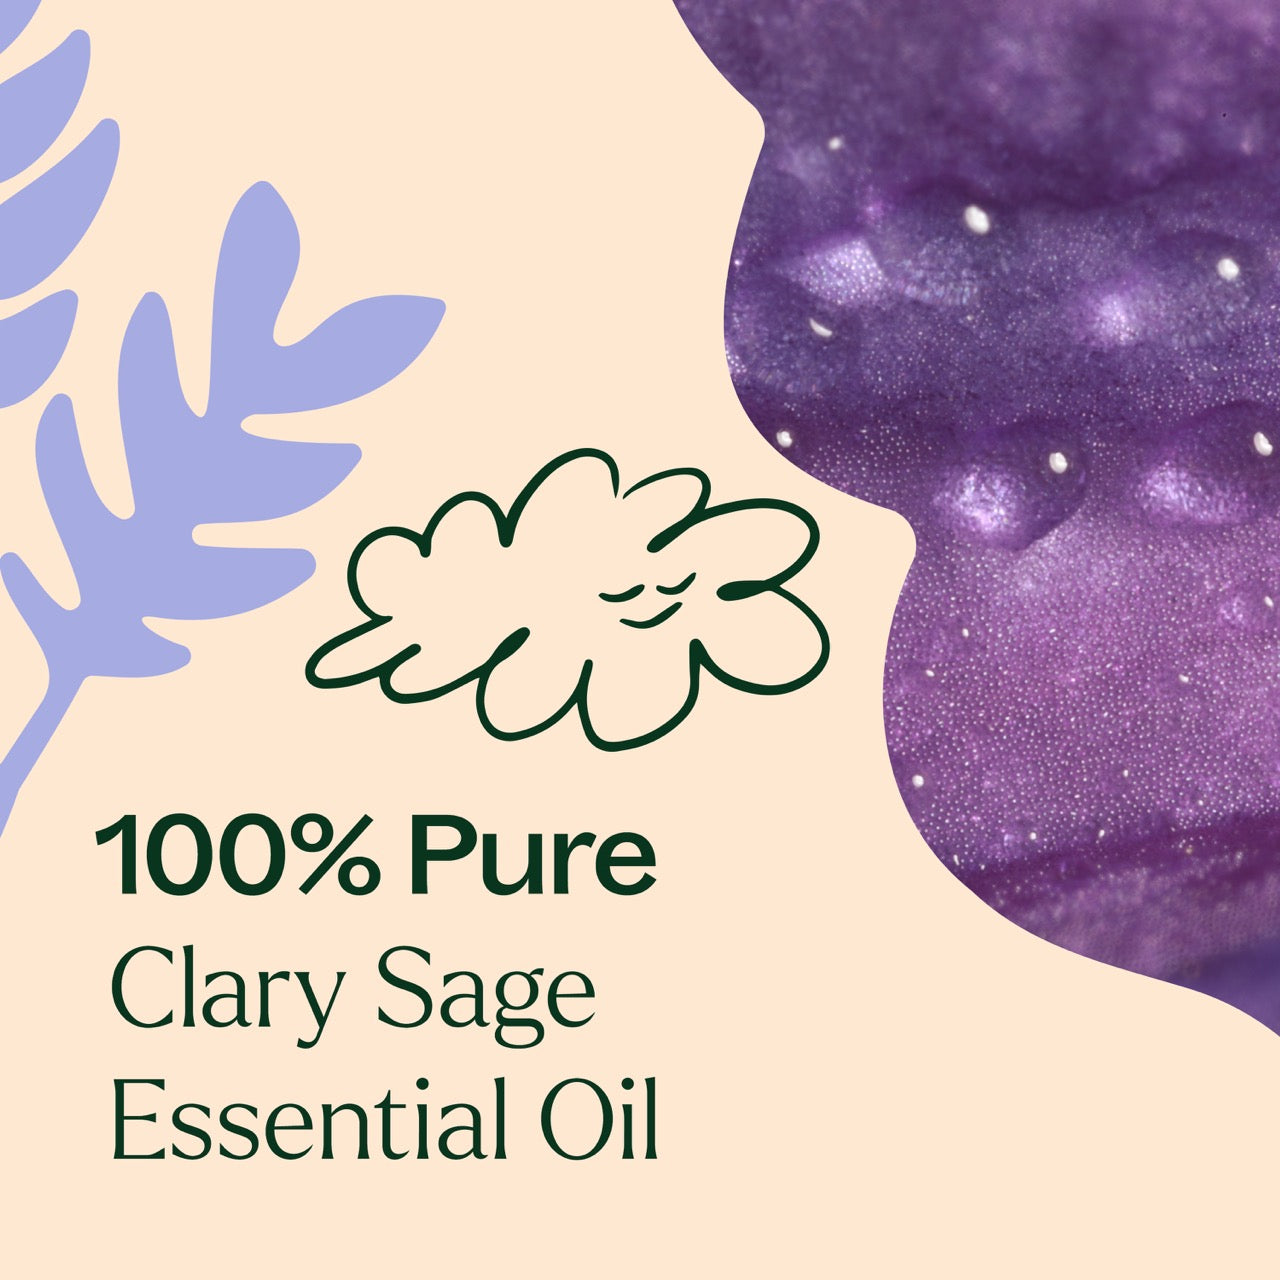 100% pure Clary Sage Essential Oil